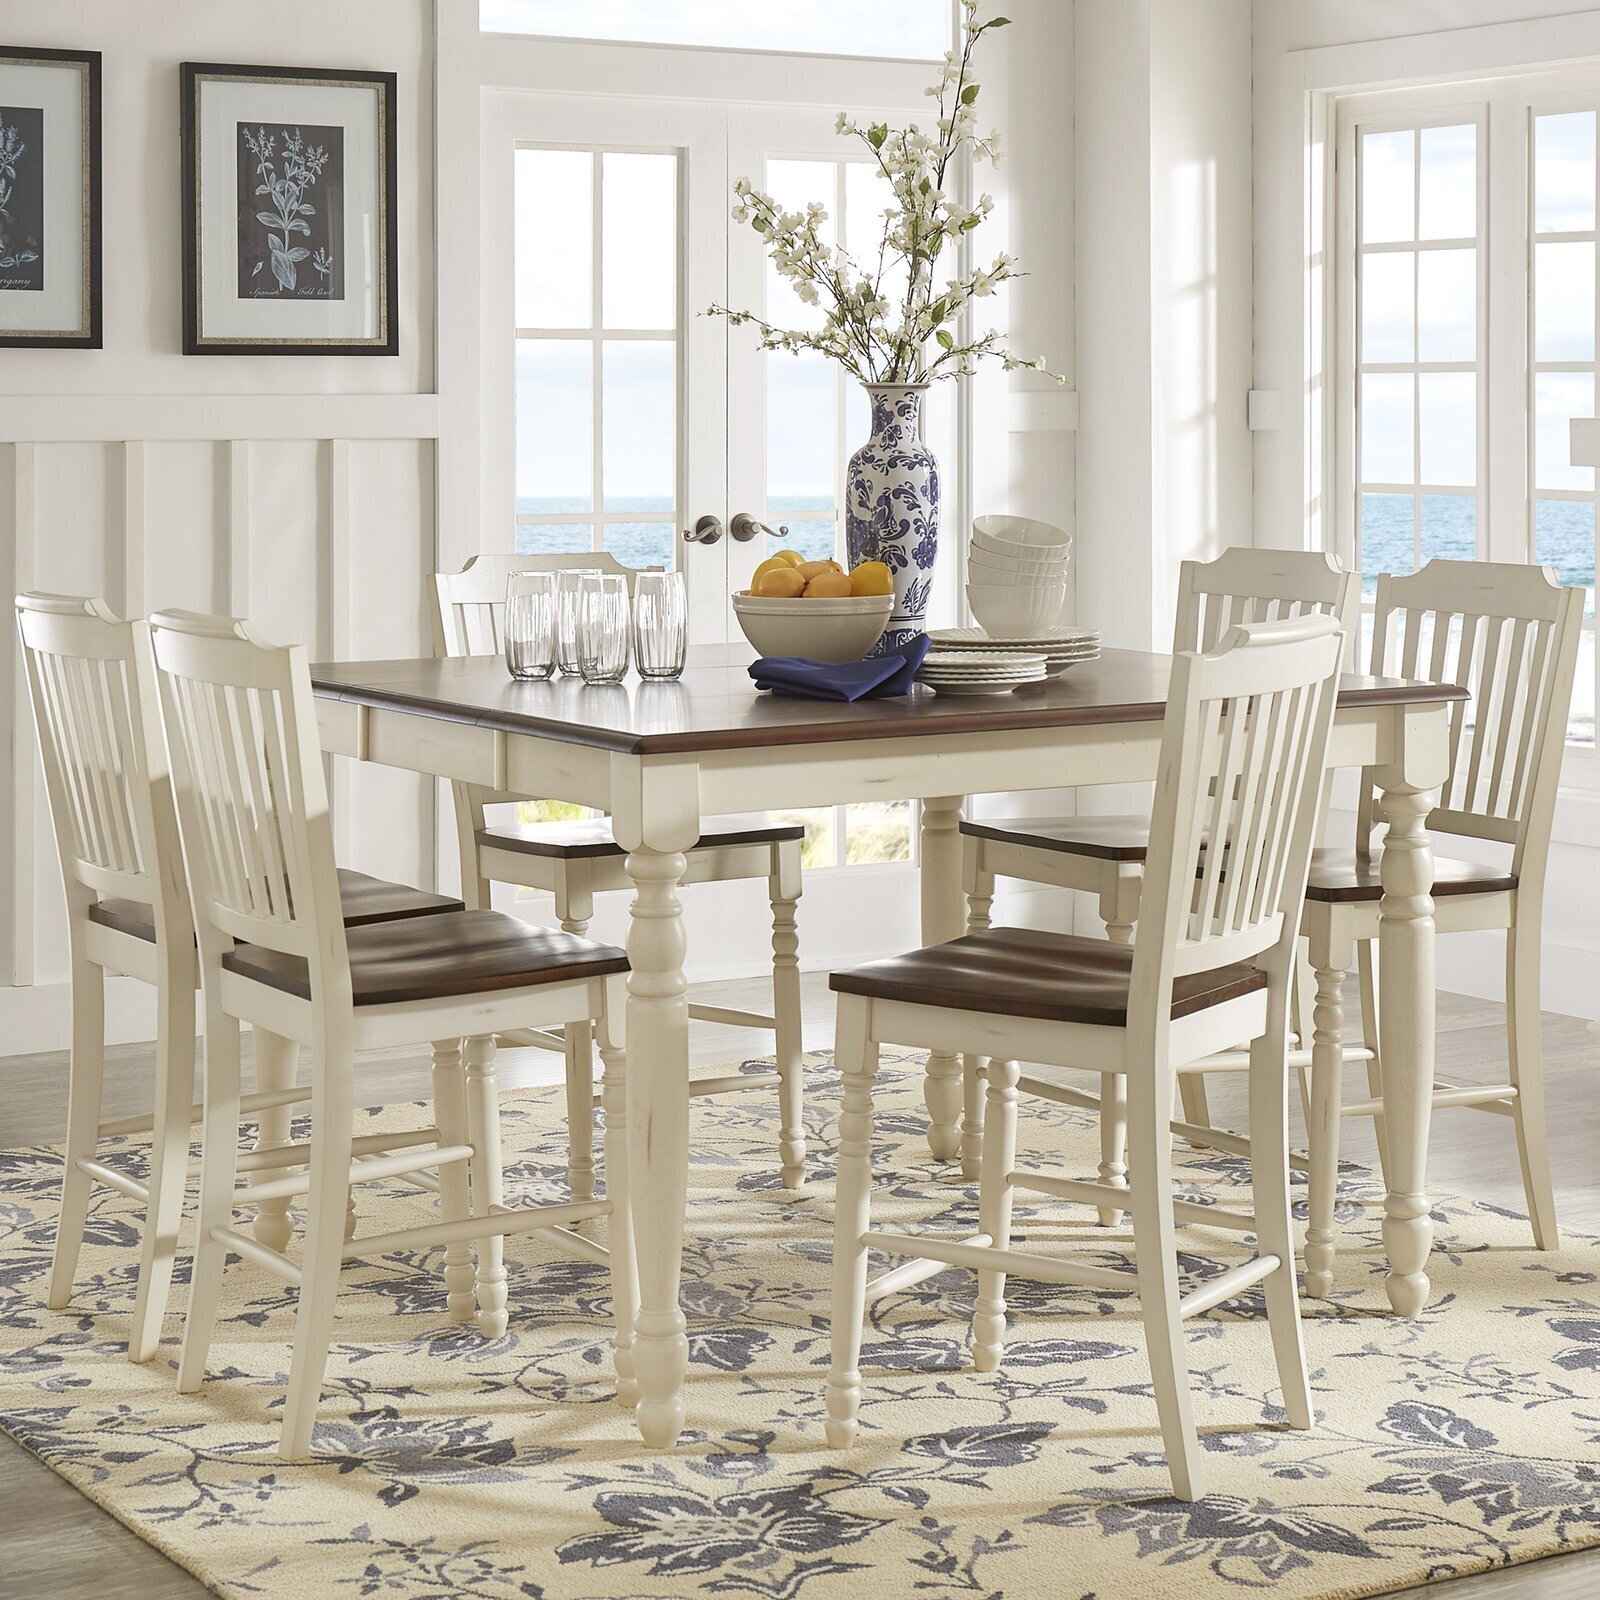 Counter height dining table with butterfly leaf in farmhouse style